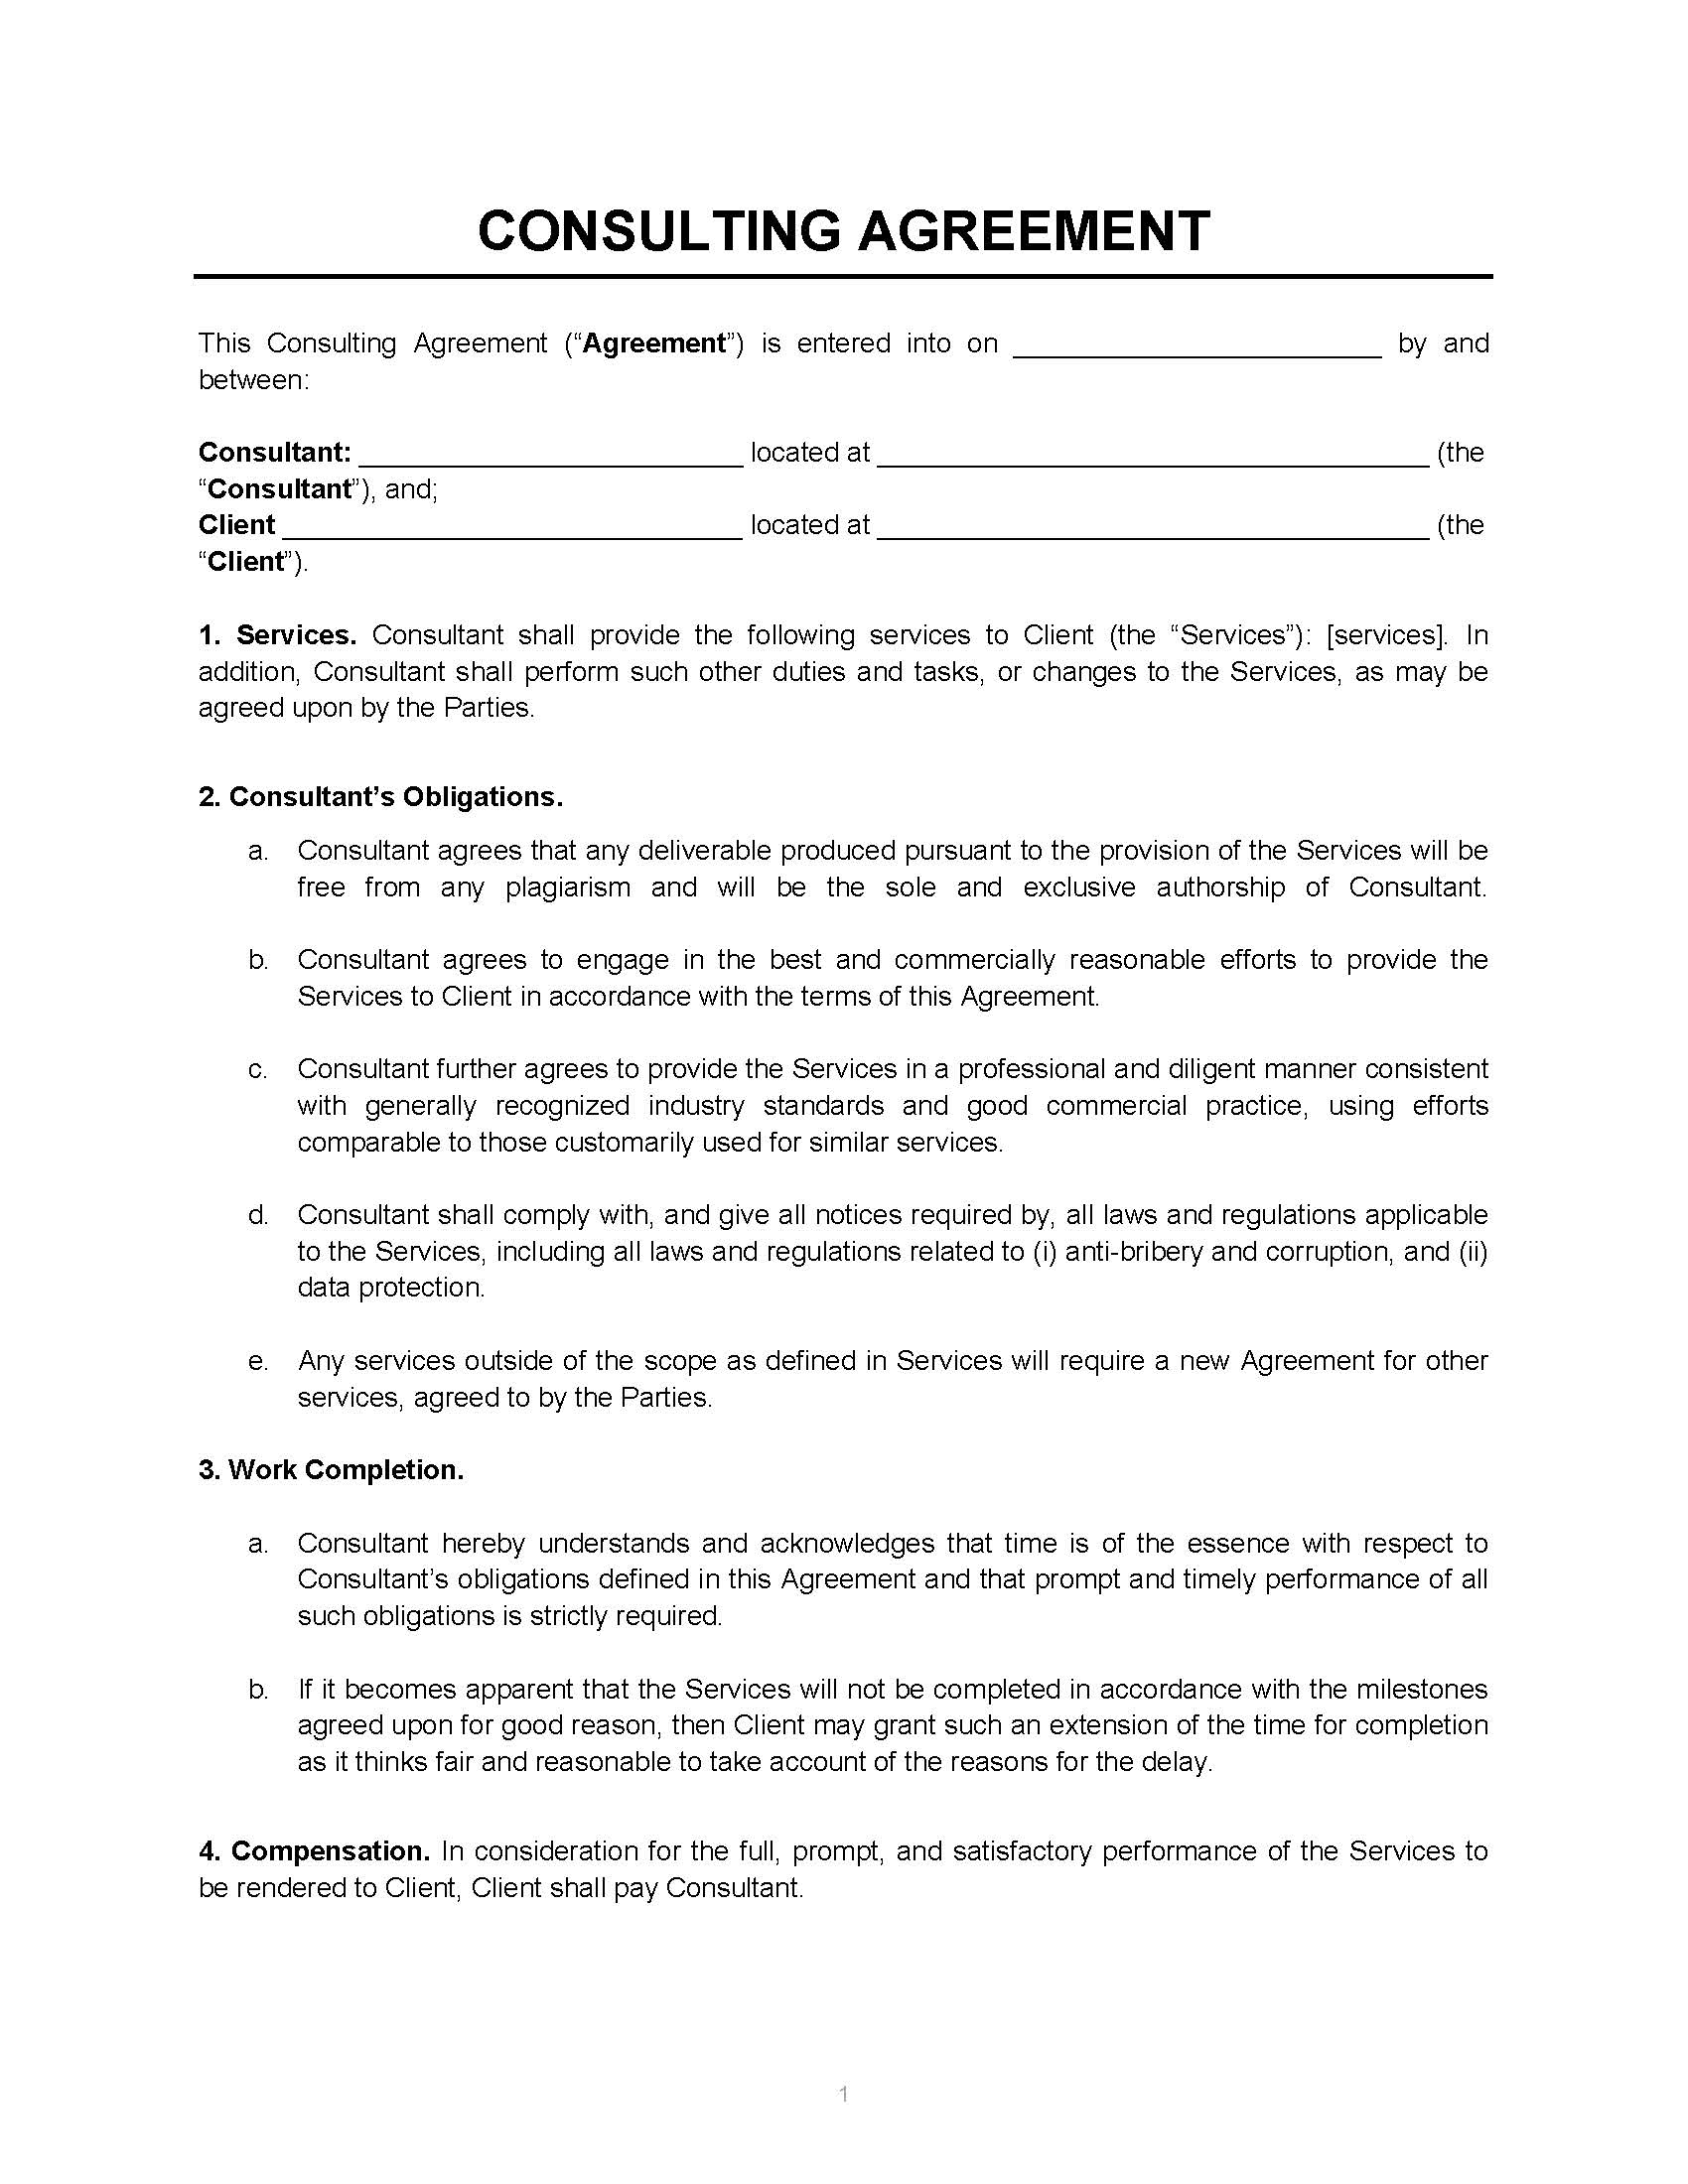 Consulting Agreement screenshot